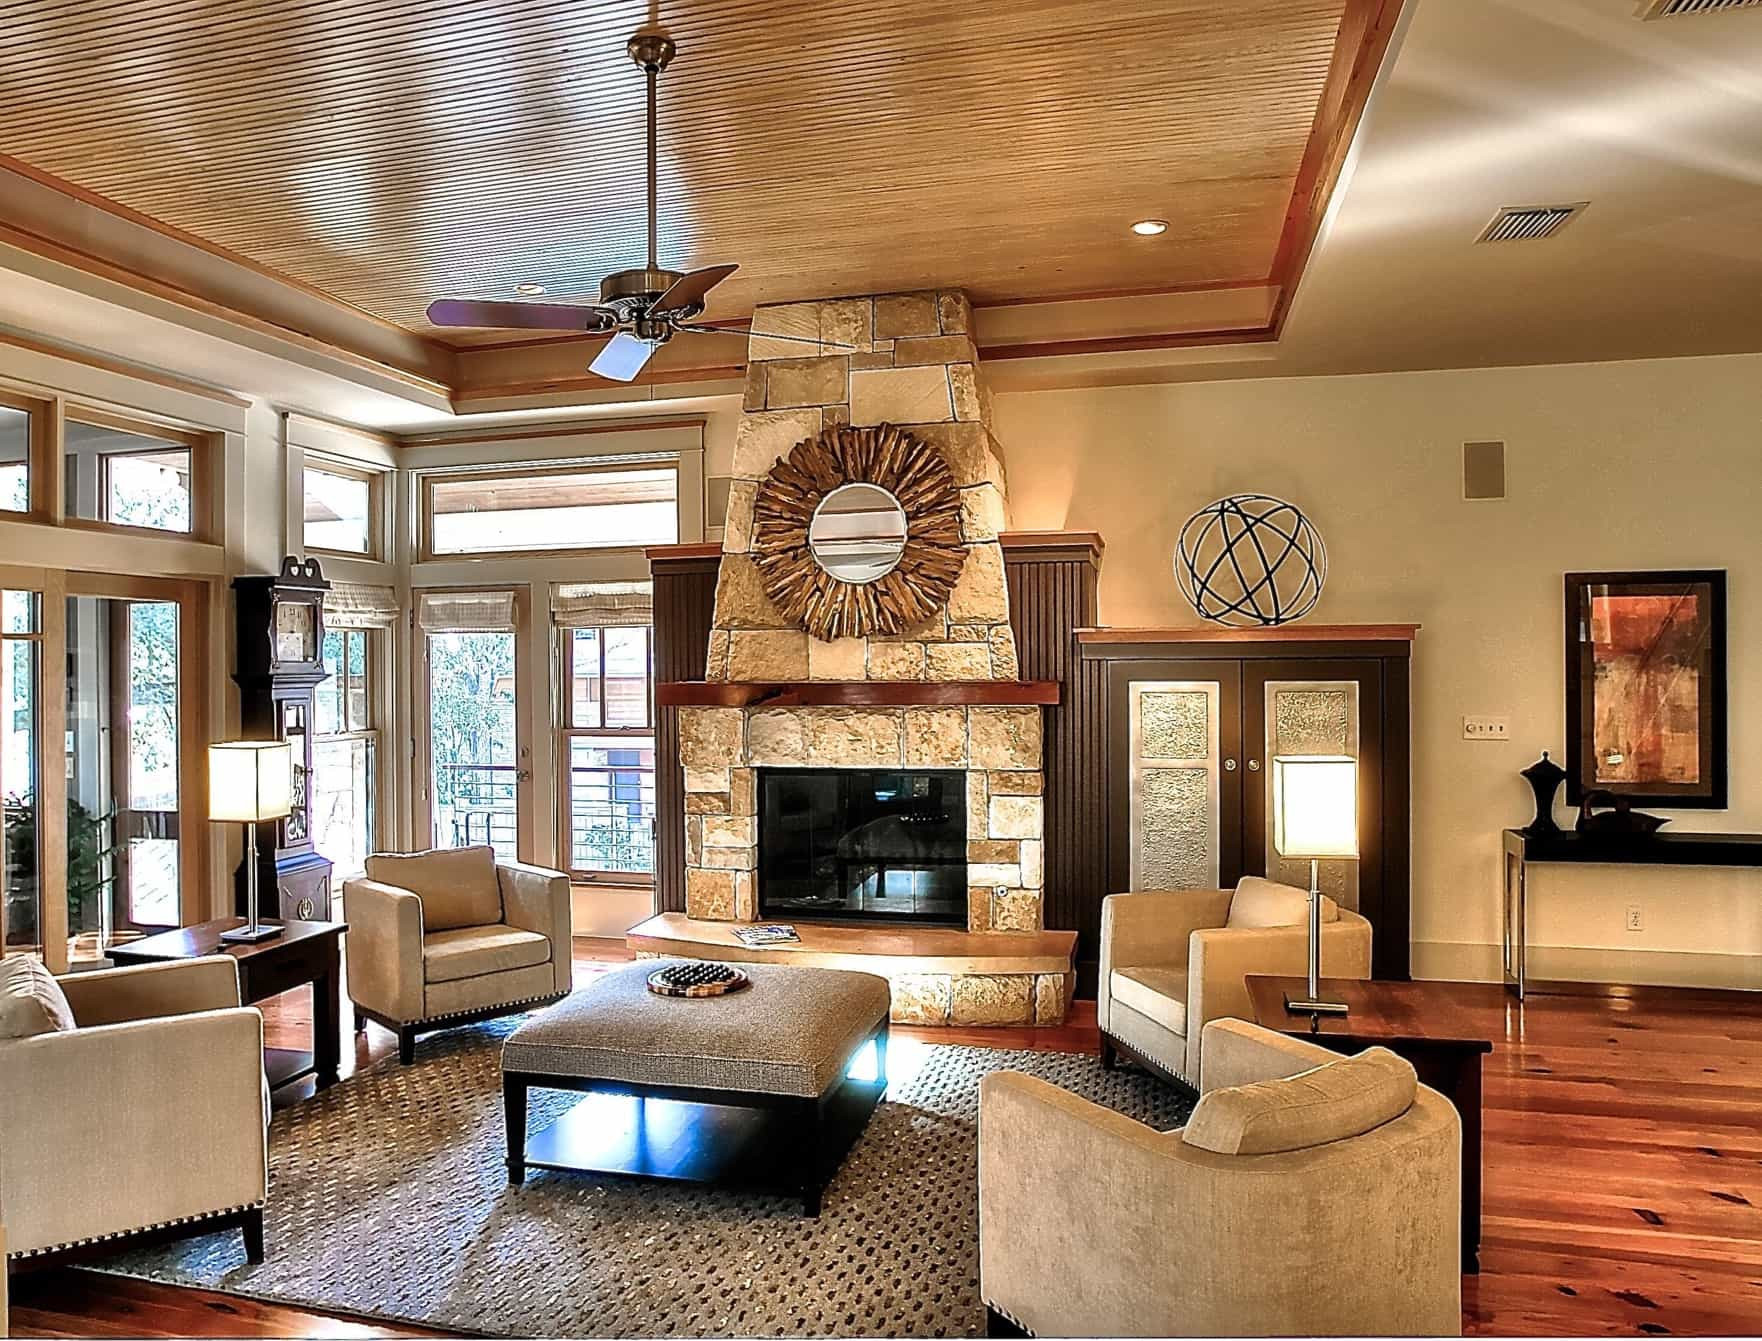 Tray Ceiling Ideas Living Room
 Tray Ceiling And Stone Fireplace For Modern Living Room